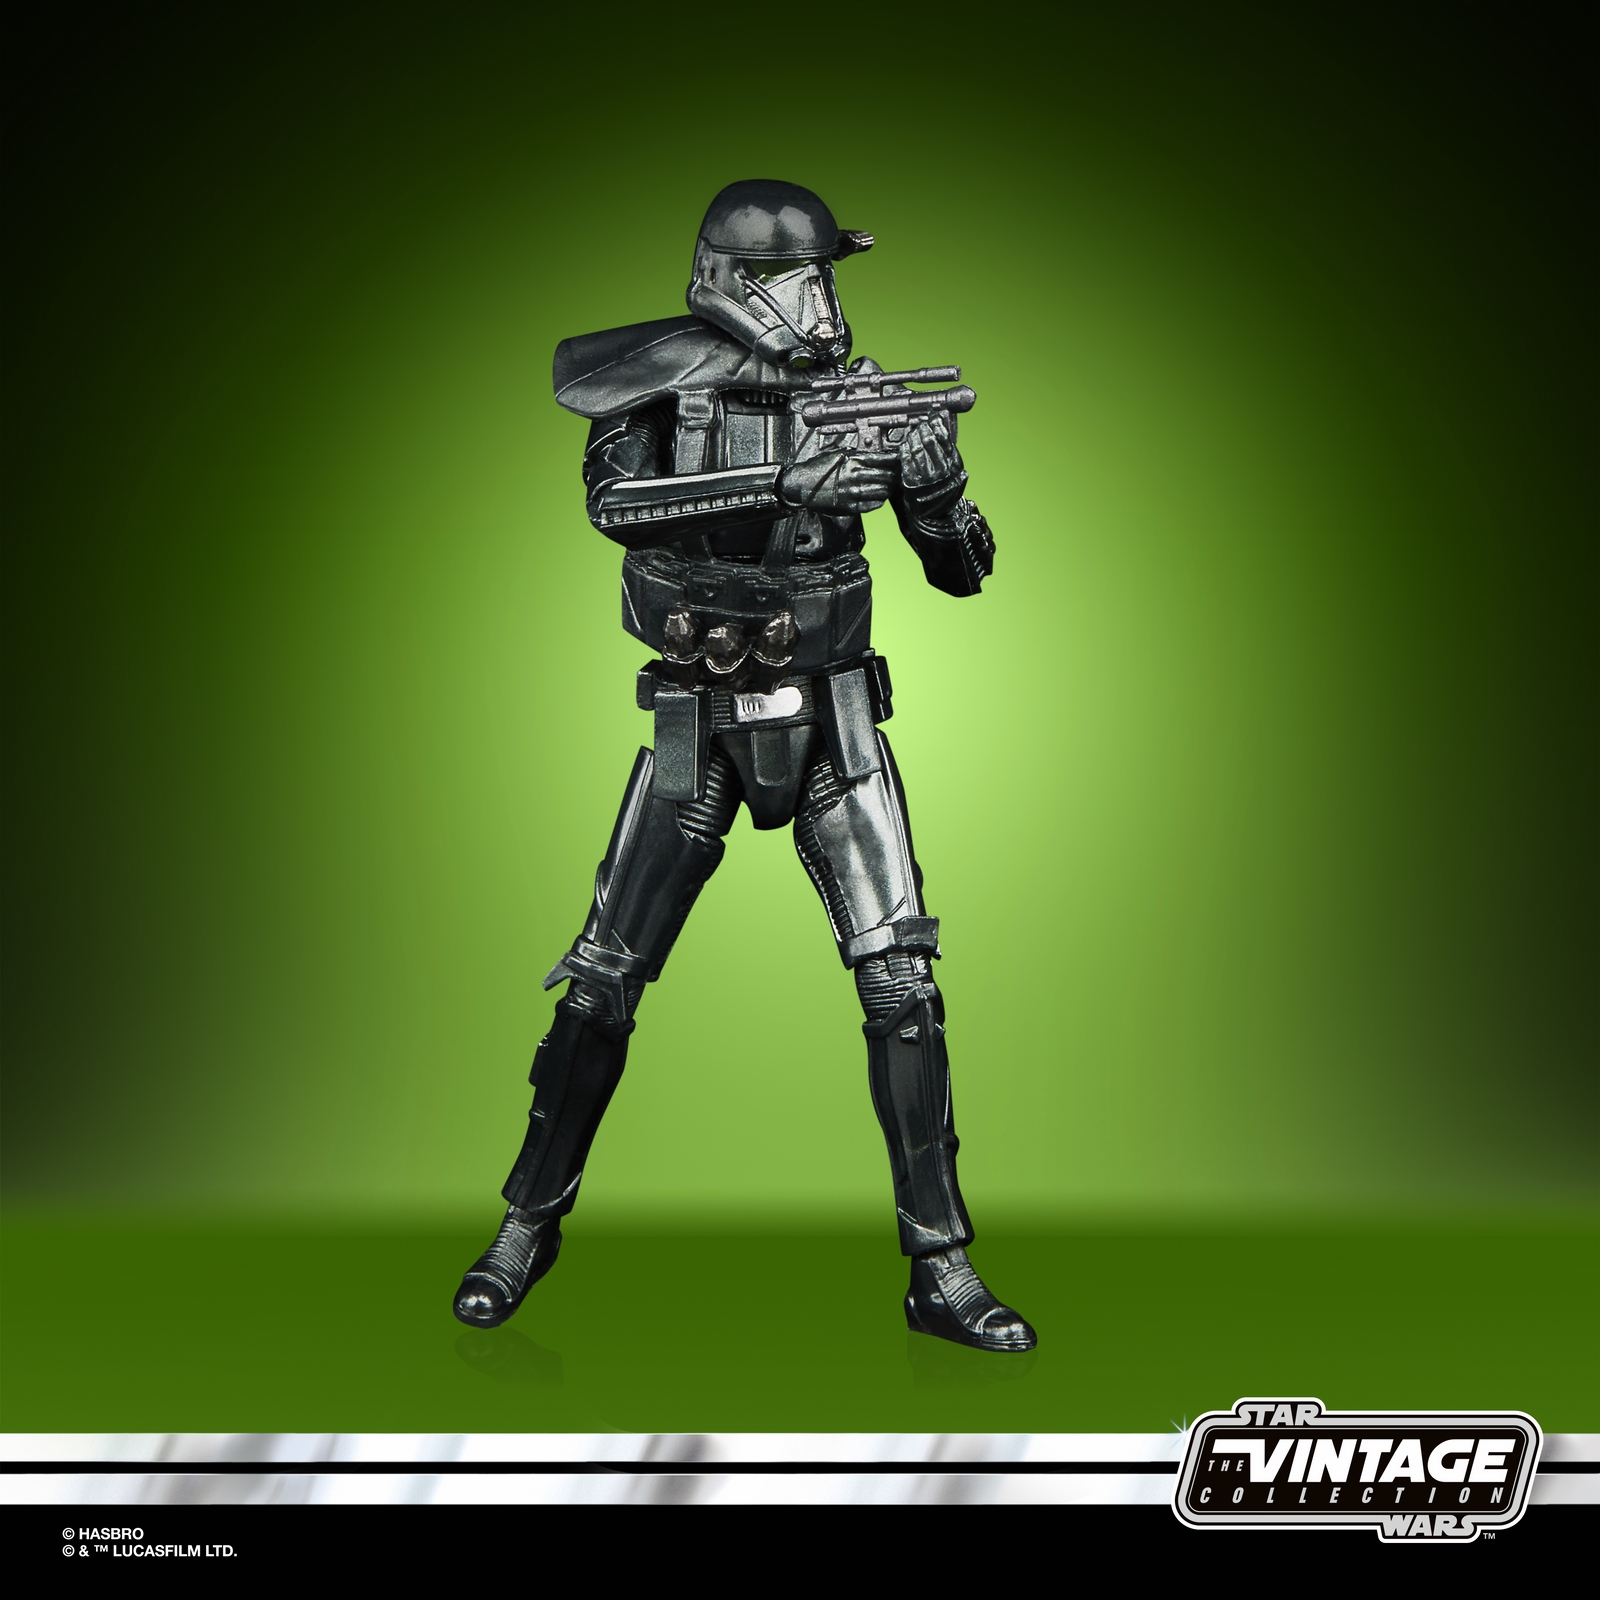 STAR WARS THE VINTAGE COLLECTION CARBONIZED COLLECTION 3.75-INCH DEATH TROOPER - oop3.jpg